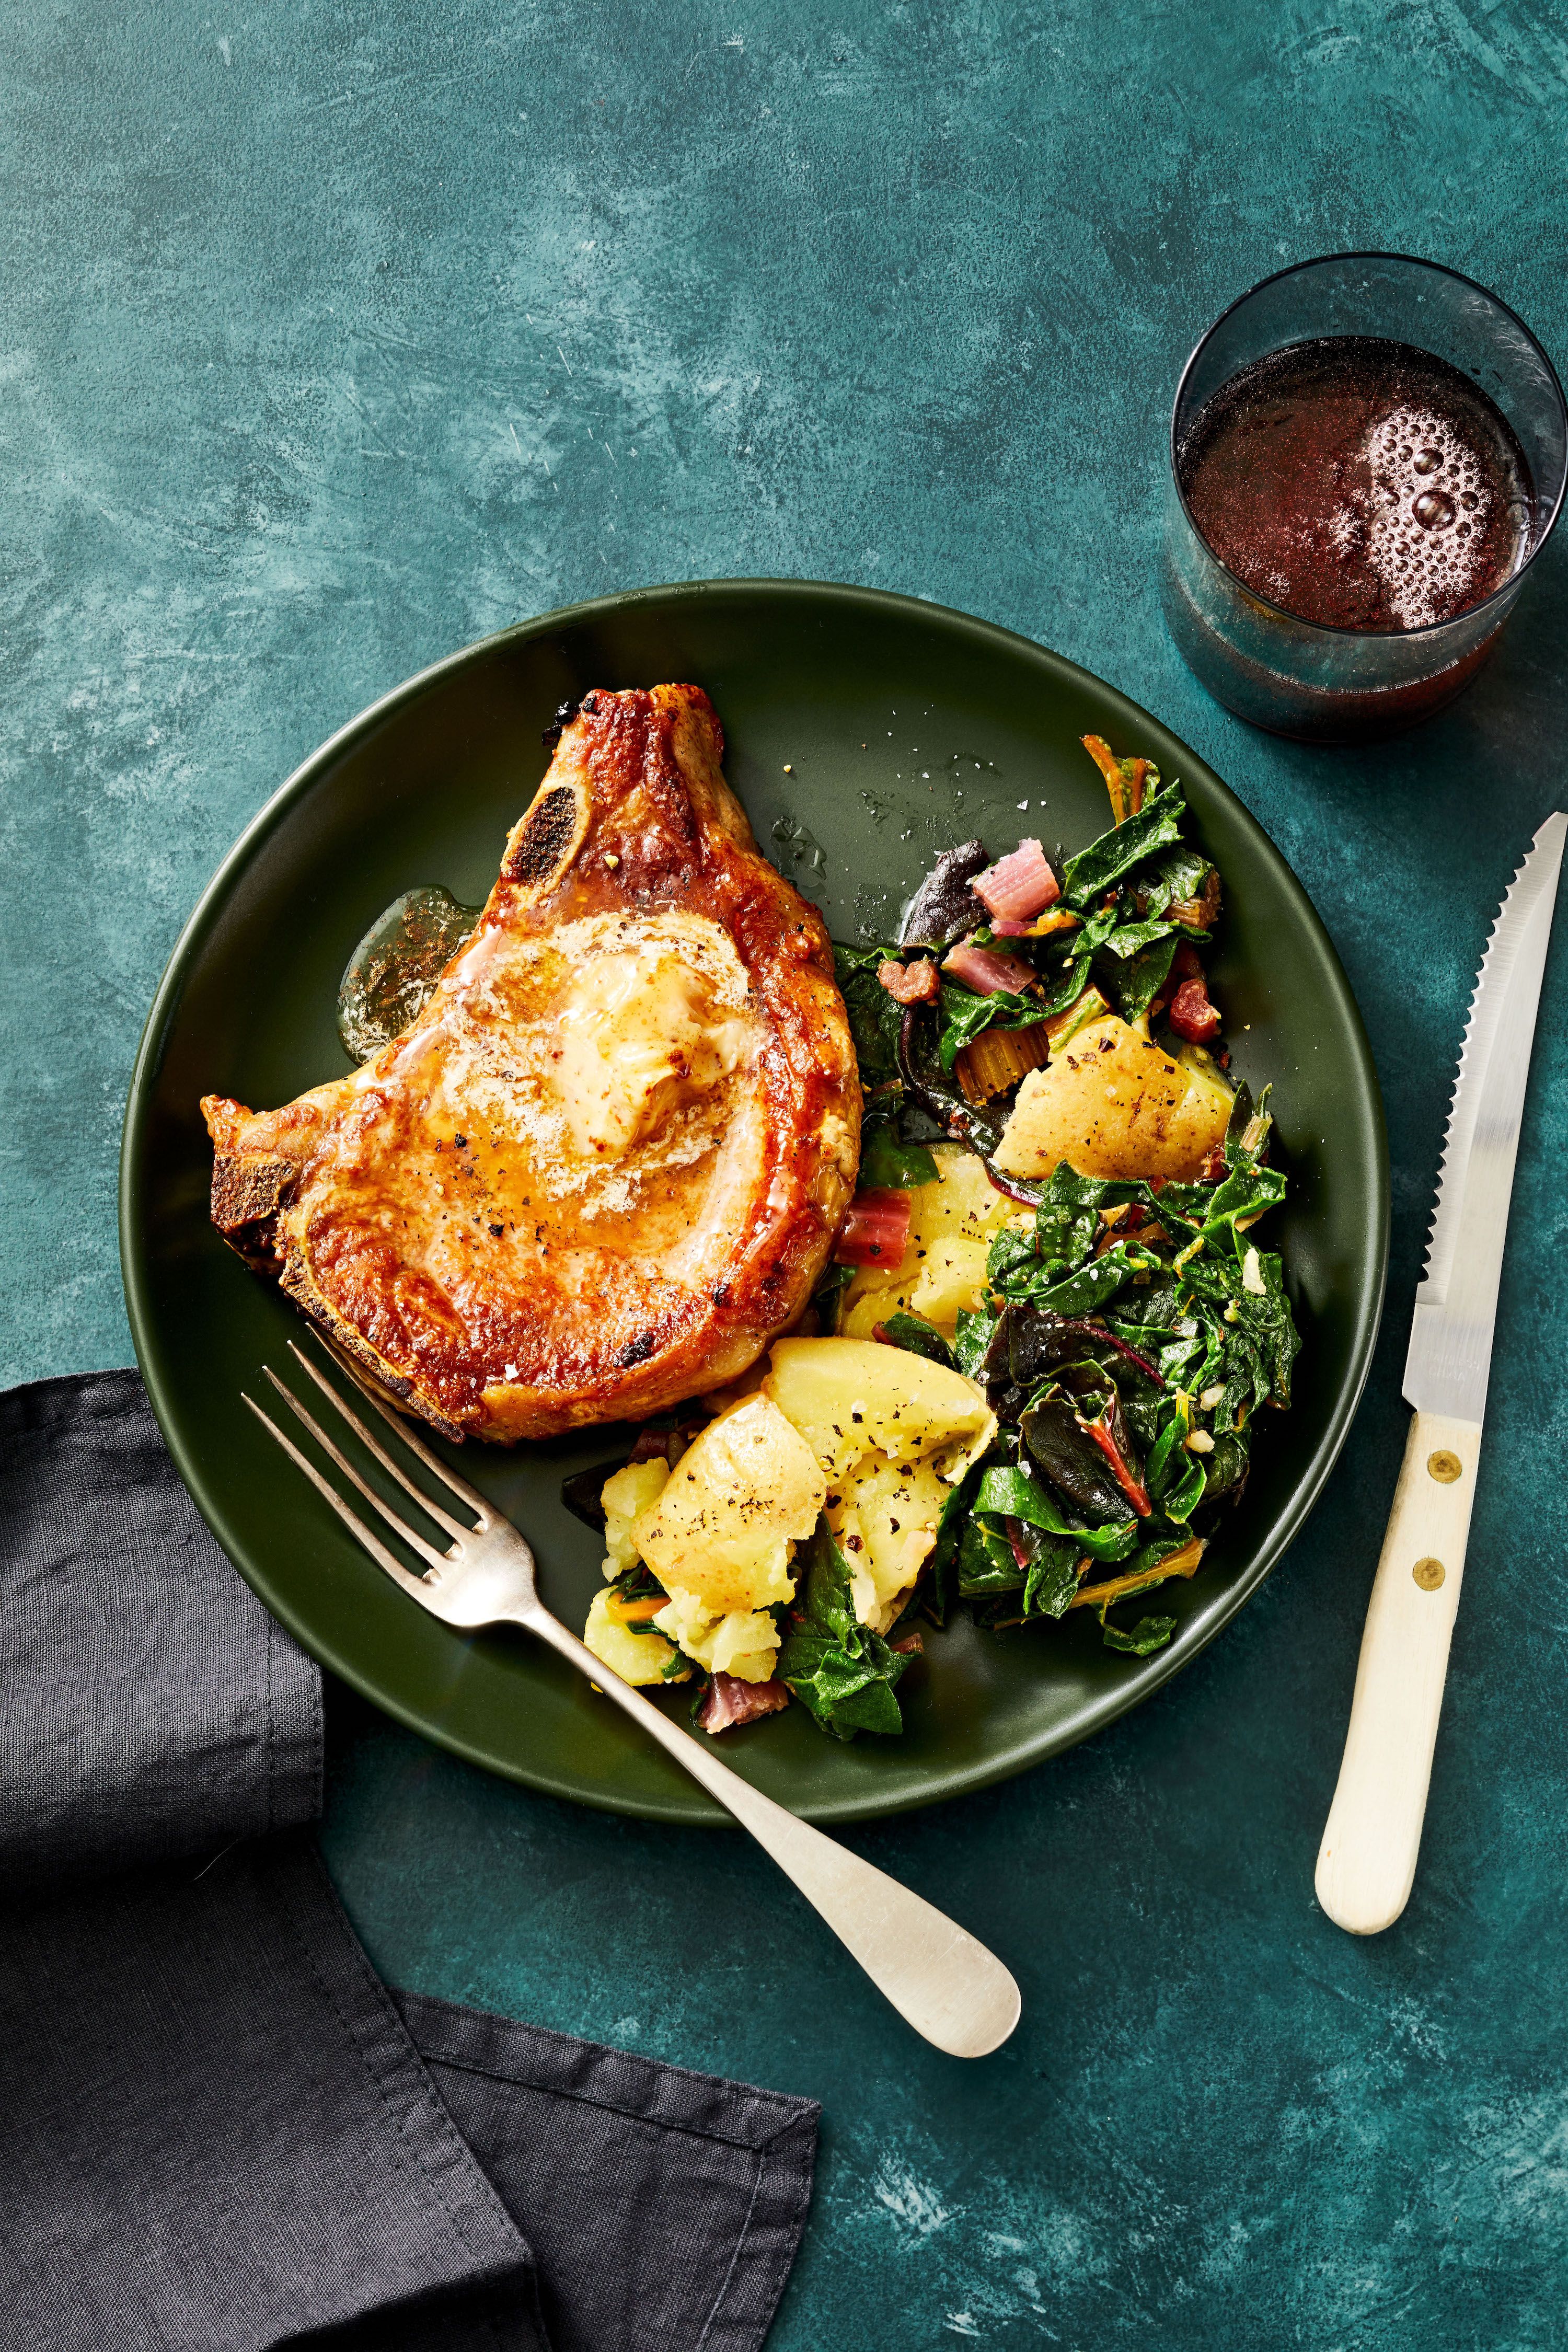 https://hips.hearstapps.com/hmg-prod/images/aleppo-pork-chops-with-potatoes-and-greens-65494d1dc565f.jpg